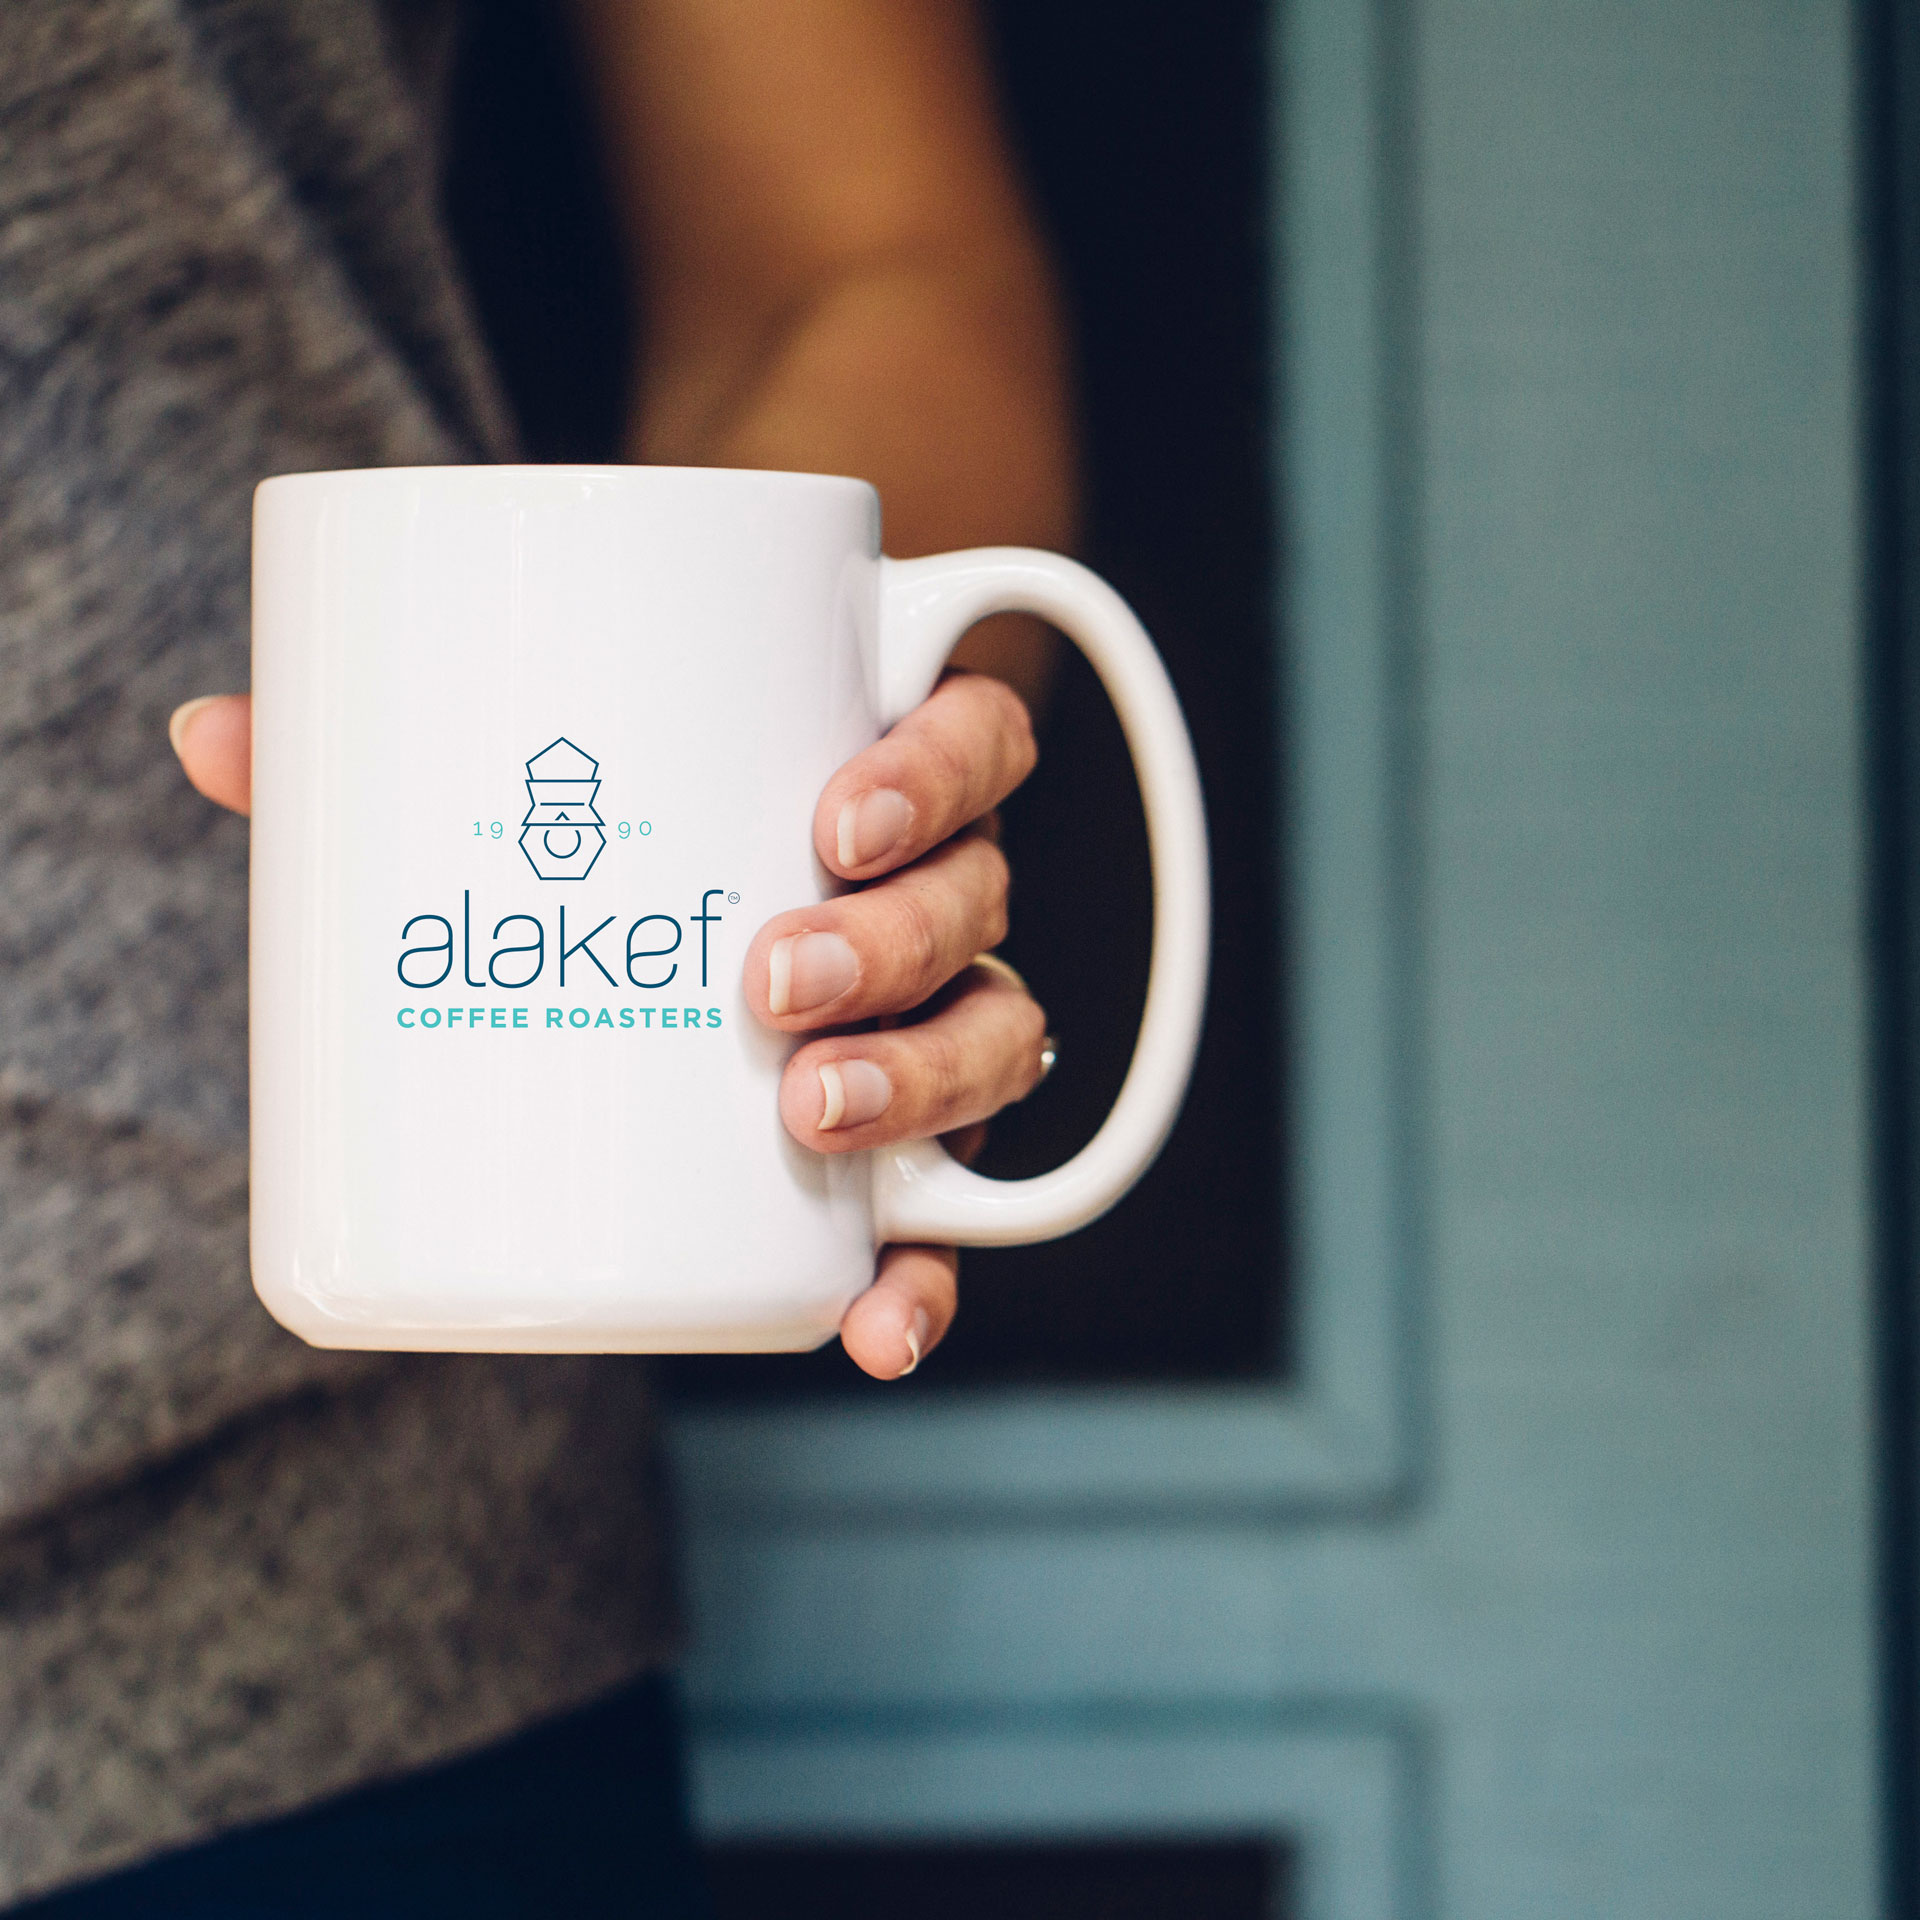 A person holds a white coffee mug with the logo and text "alakaf COFFEE ROASTERS" printed in blue. The background is slightly out of focus, showcasing a wooden door. The individual, wearing a gray shirt, enjoys their alakef coffee moment.